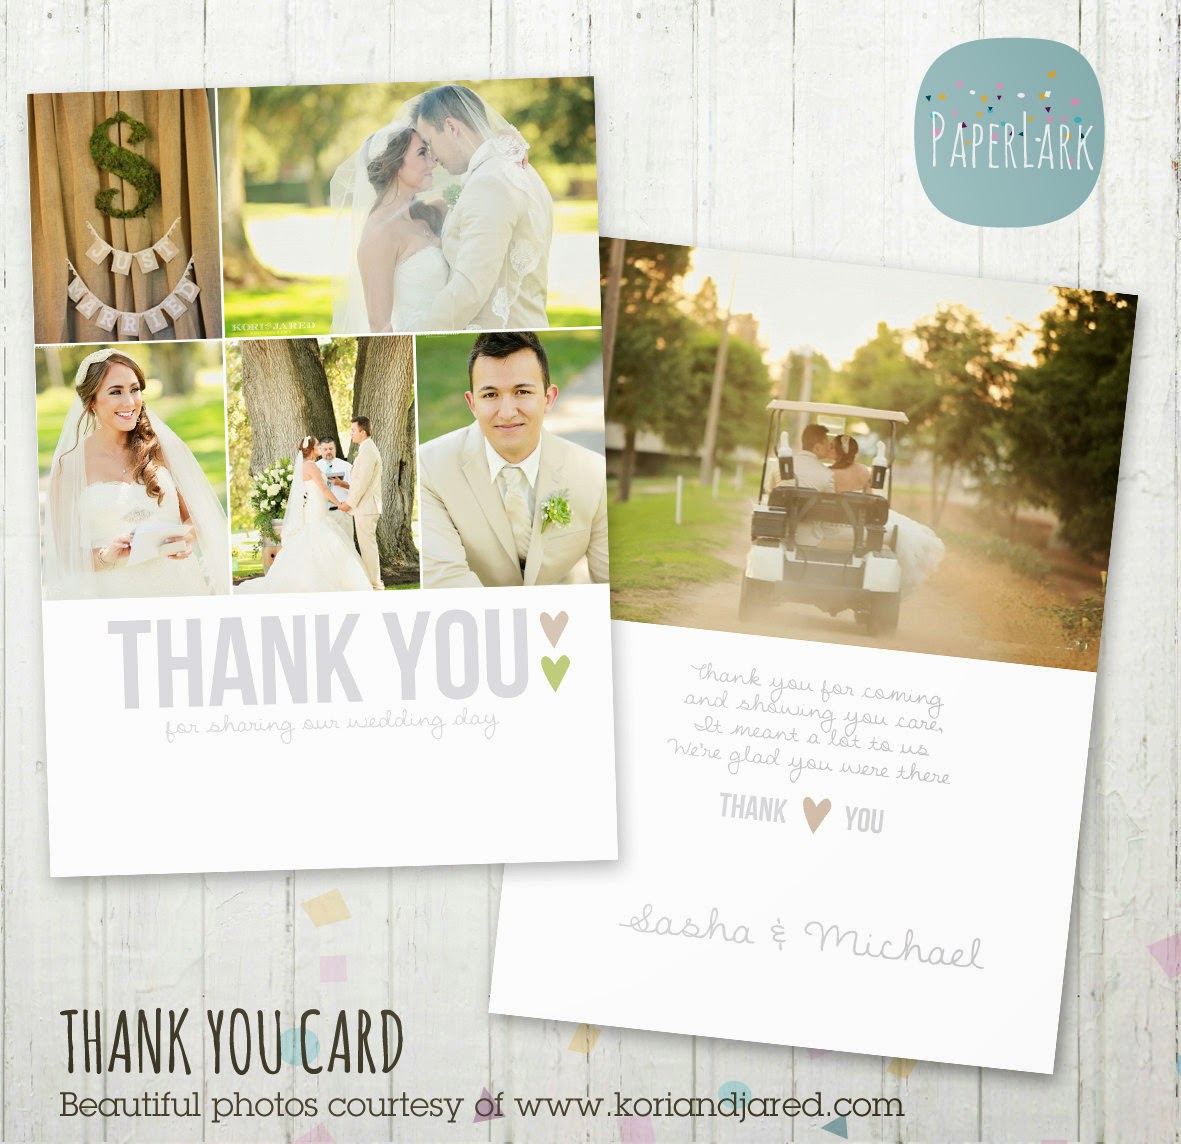 https://www.etsy.com/listing/129332263/wedding-thank-you-card-photoshop?ref=shop_home_active_1